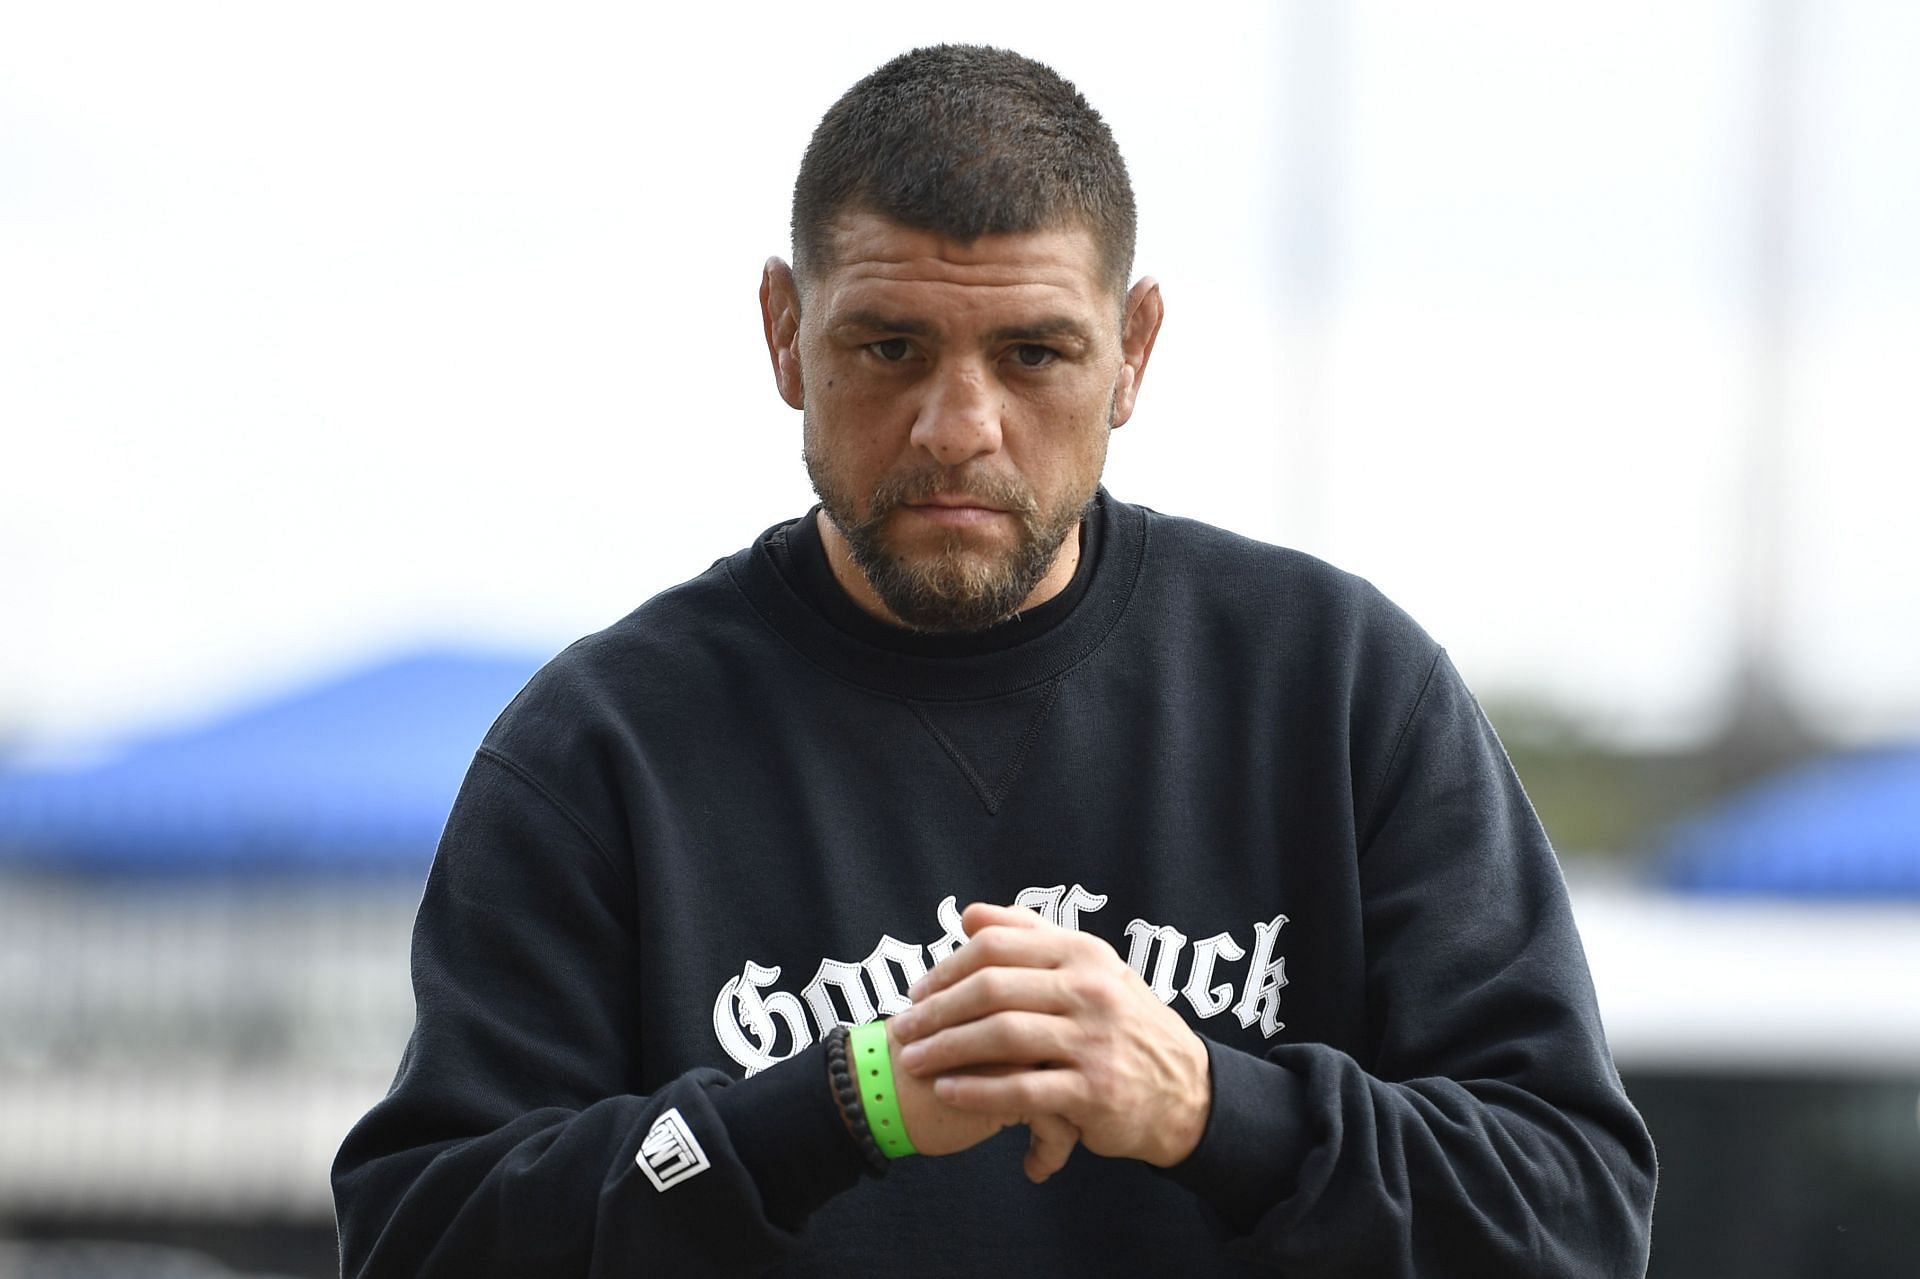 Hours after facing him in the octagon, Nick Diaz brawled with Joe Riggs in the hospital